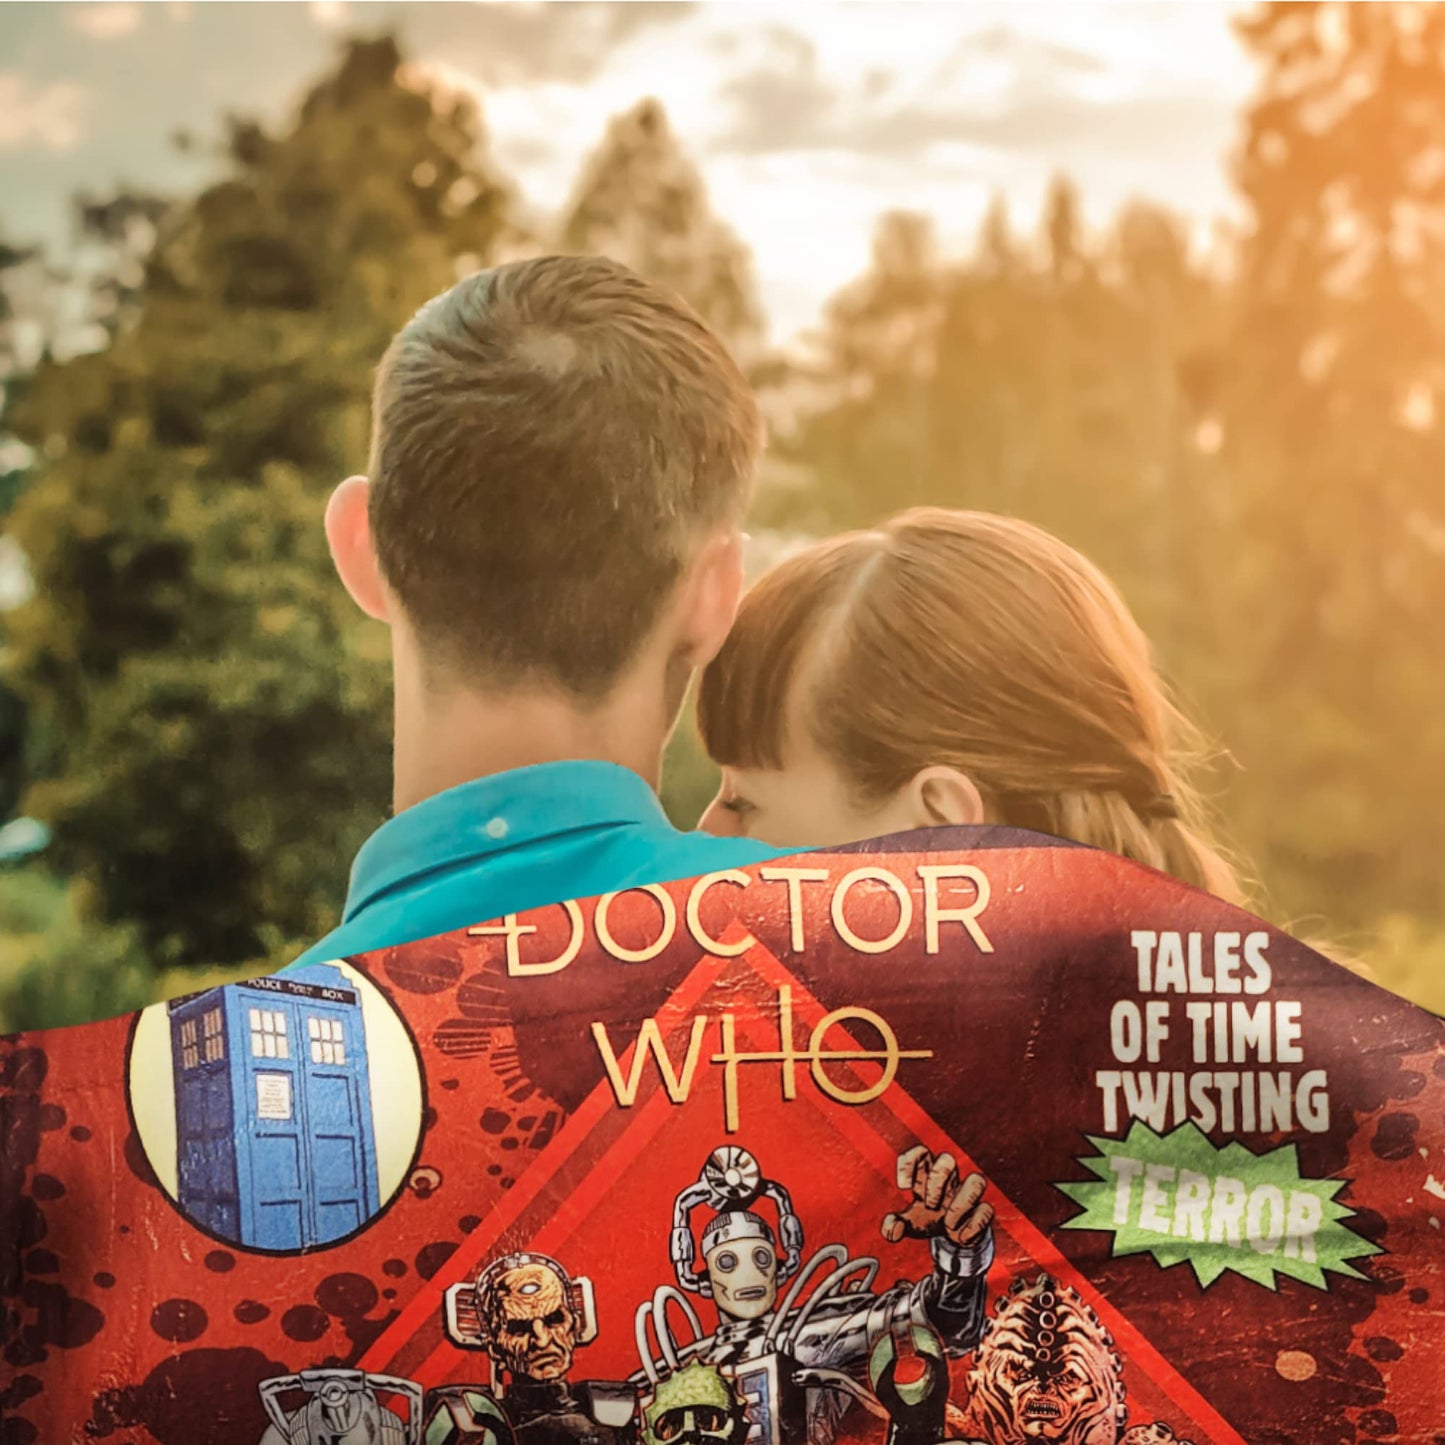 Bazillion Dreams Doctor Who Villains Comic Fleece Softest Comfy Throw Blanket for Adults & Kids | Measures 60 x 50 Inches